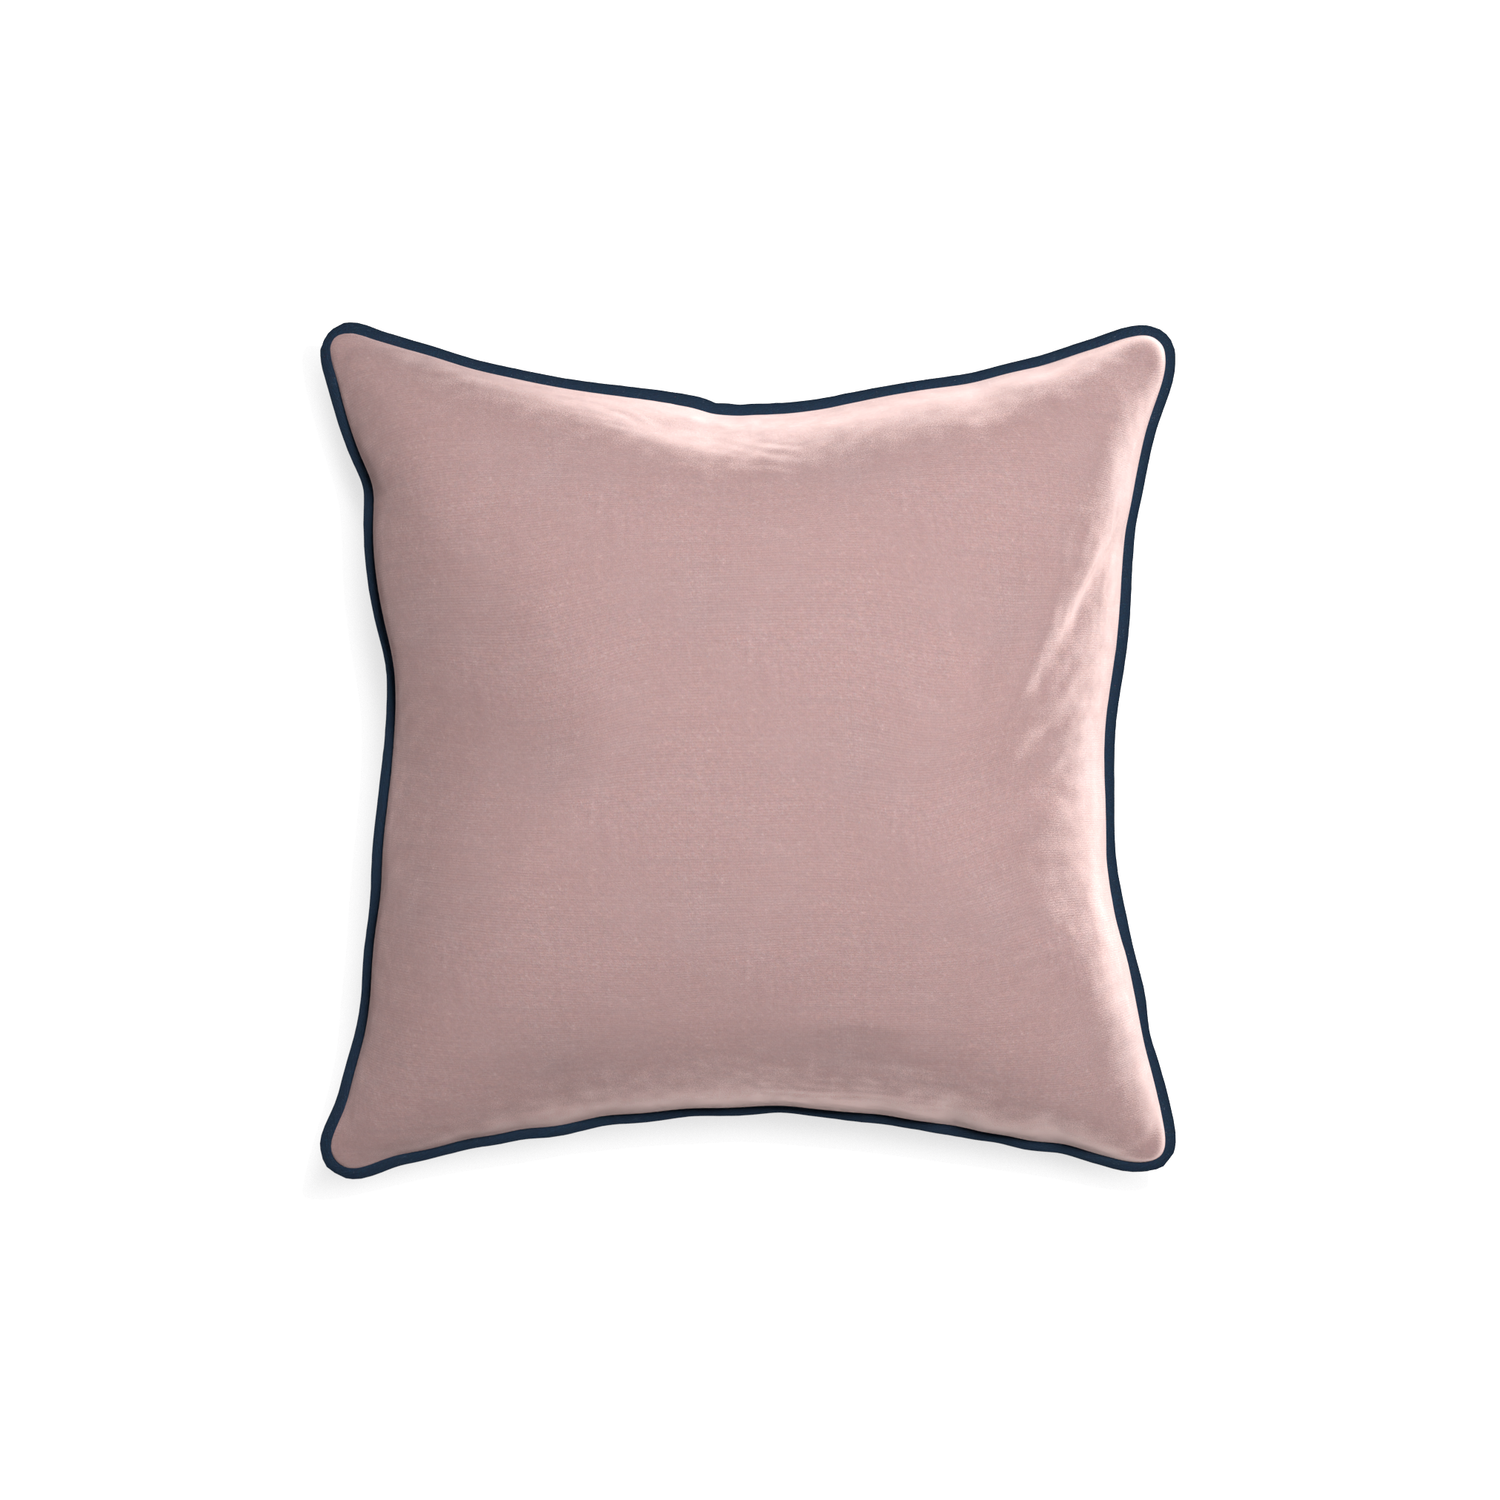 18-square mauve velvet custom mauvepillow with c piping on white background